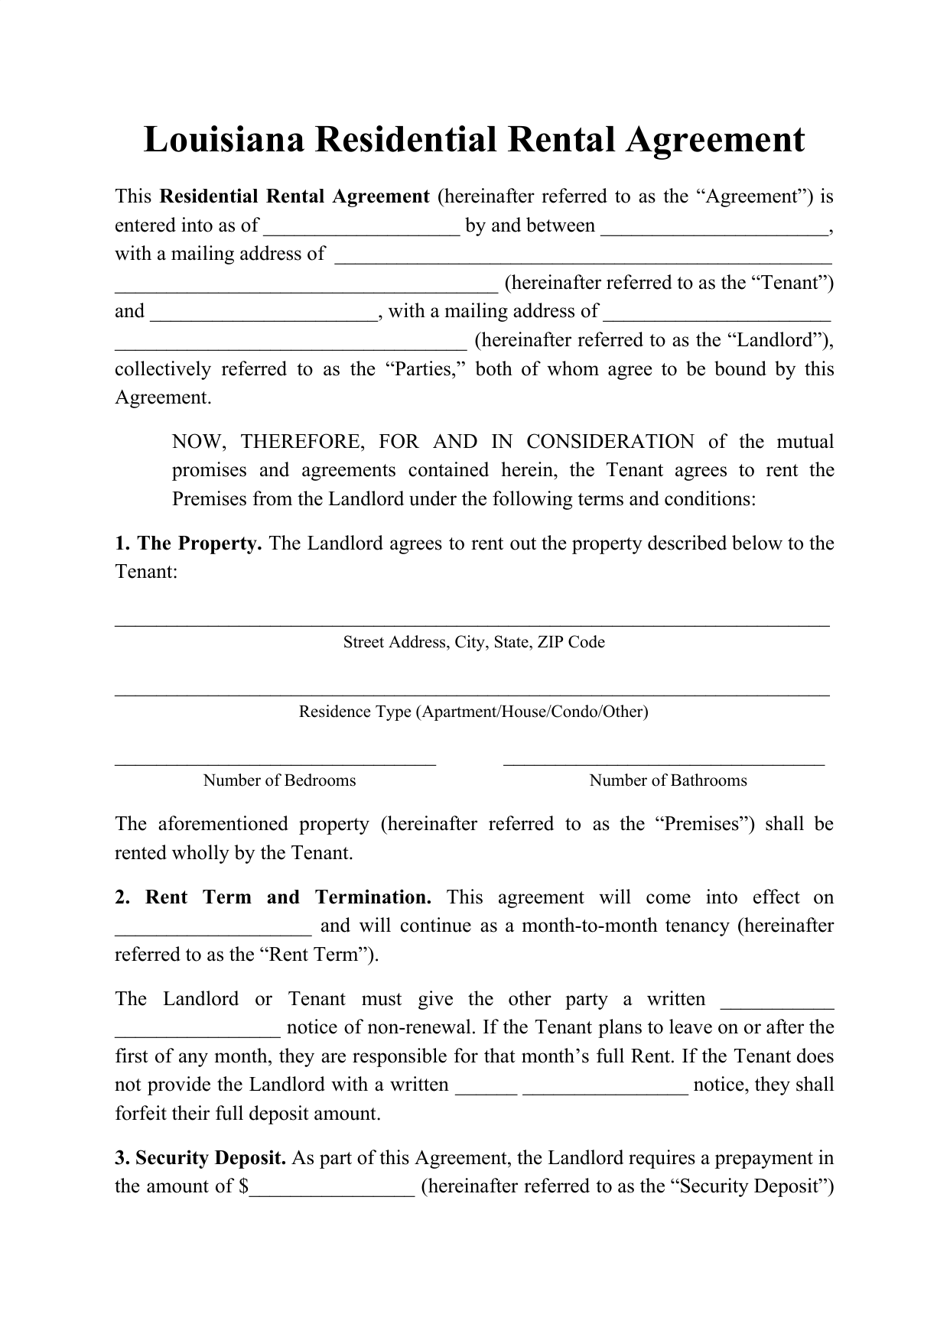 Residential Rental Agreement Template - Louisiana, Page 1